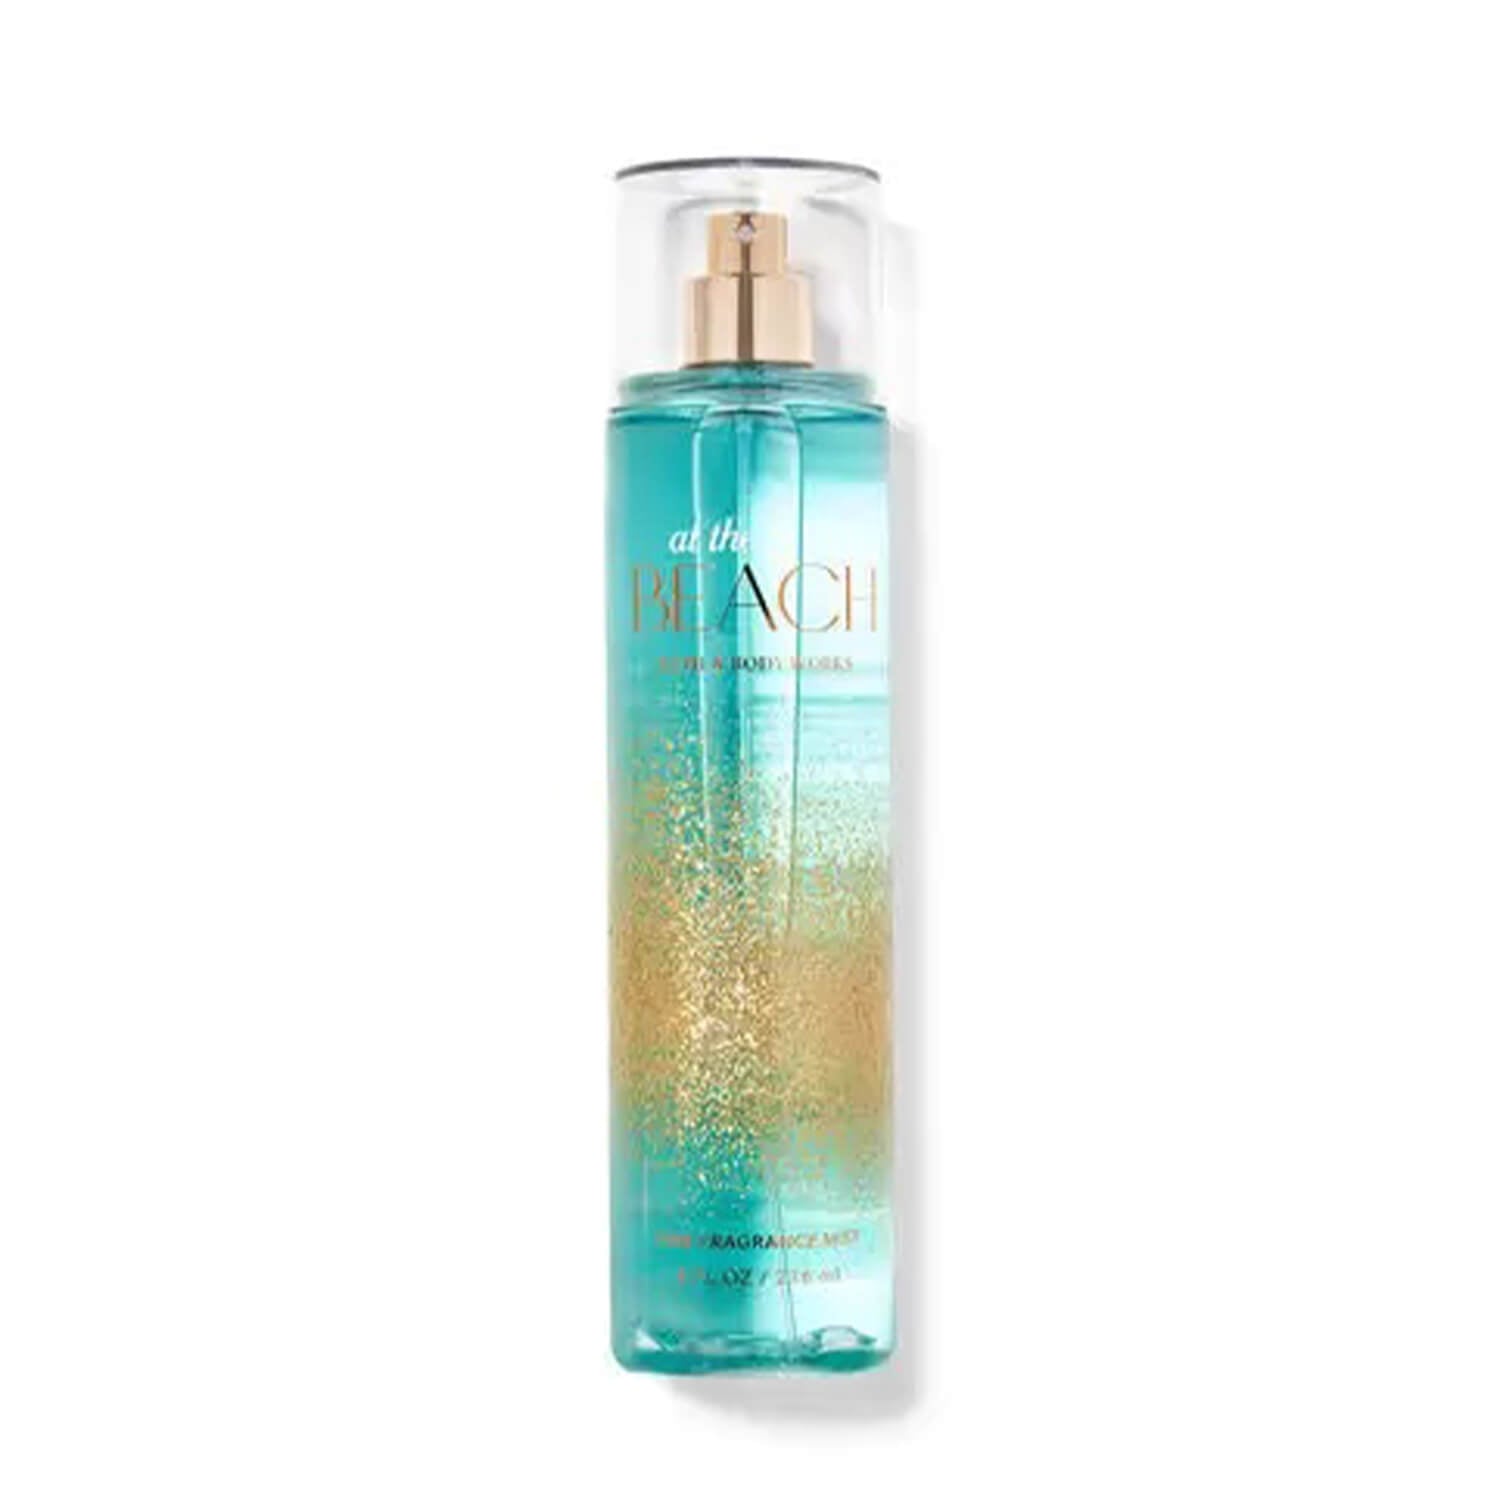 Bath and body works mist at the beach available at heygirl.pk for cash on delivery in Pakistan